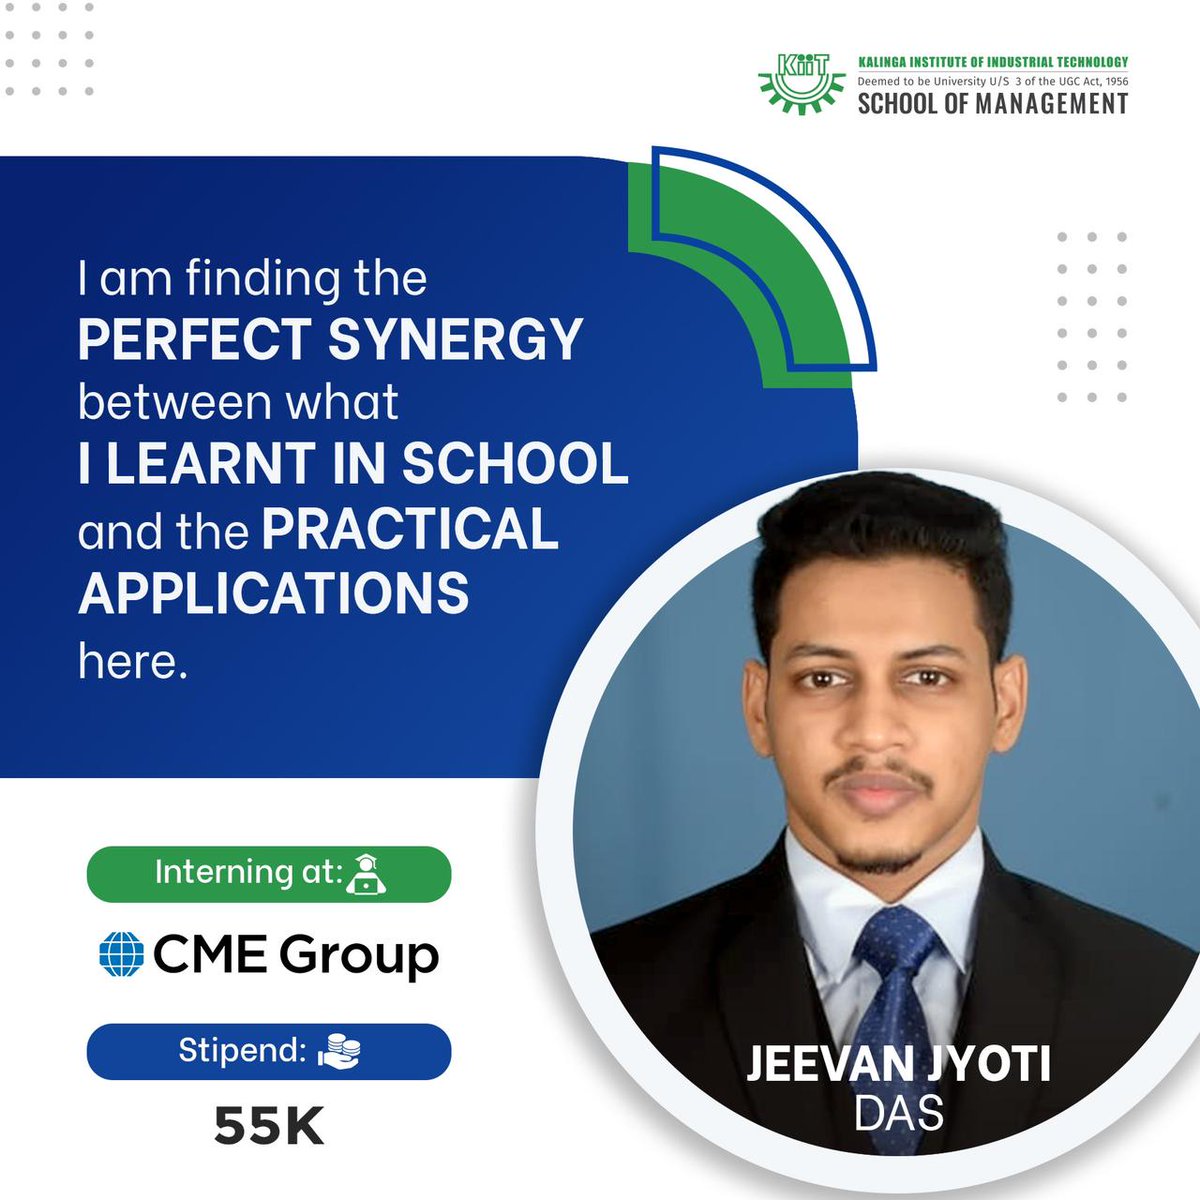 Jeevan Jyoti Das shares his experience during the KSOM Summer Internship Program and how working with CME Group helped him become more resourceful and achieve results.

#ksombbsr #SummerInternshipProgram #kiit #MBA #CMEGroup #bhubaneswar #Odisha